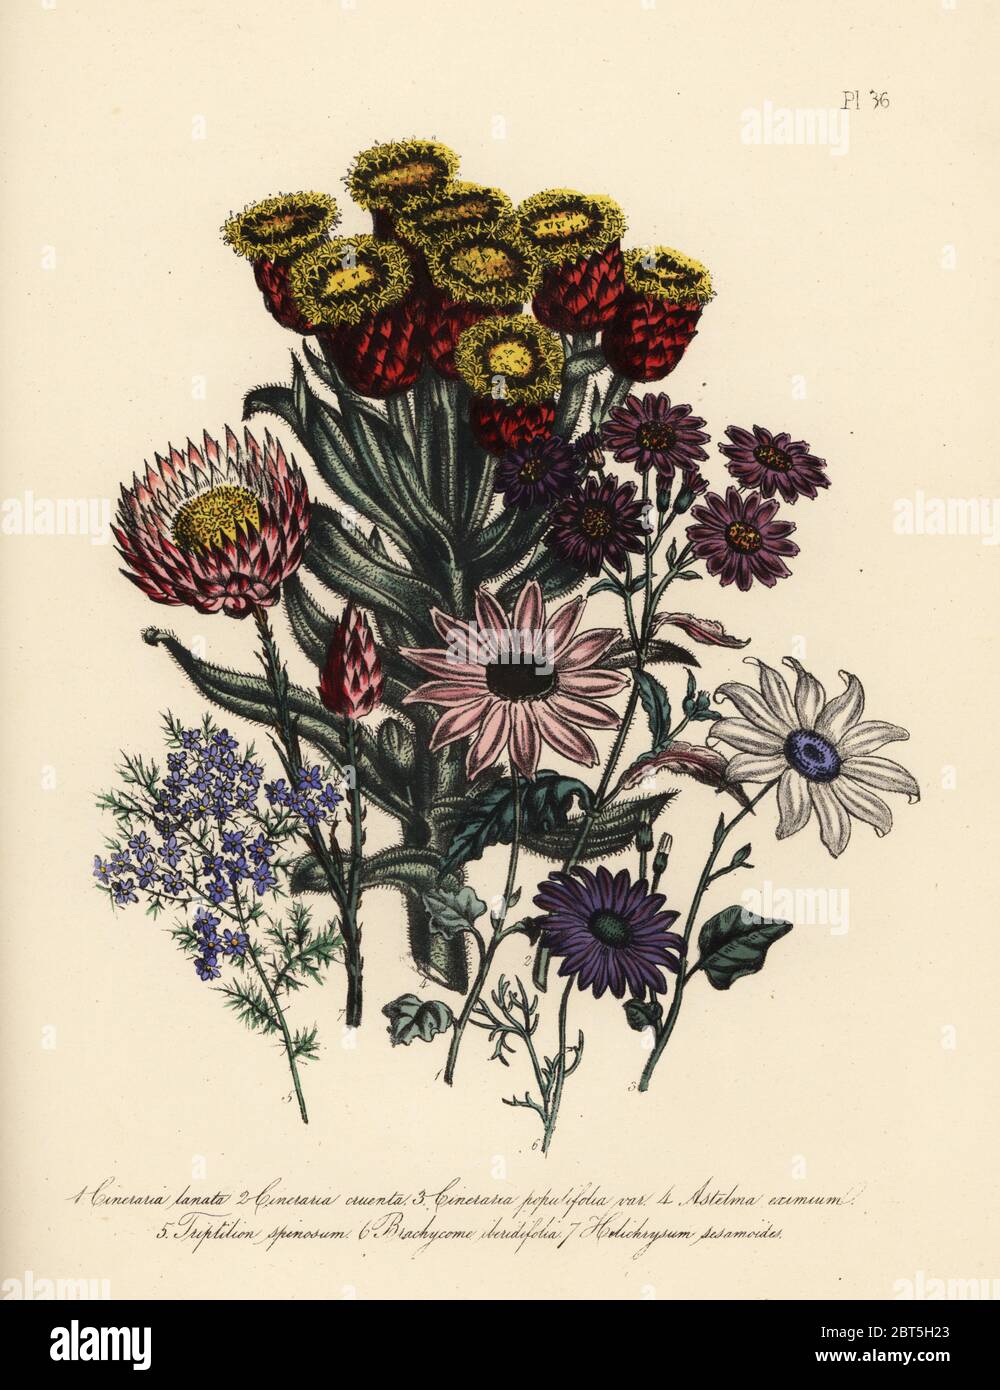 Woolly cineraria, Cineraria lanata, purple-leaved, Cineraria cruenta, poplar-leaved, Cineraria populifolia, great astelma, Astelma eximium, spiny triptilion, Triptilion spinosum, large swan daisy, Brachycome iberidifolia, and superb helichrysum, Helichrysum sesamoides. Handfinished chromolithograph by Henry Noel Humphreys after an illustration by Jane Loudon from Mrs. Jane Loudon's Ladies Flower Garden or Ornamental Greenhouse Plants, William S. Orr, London, 1849. Stock Photo